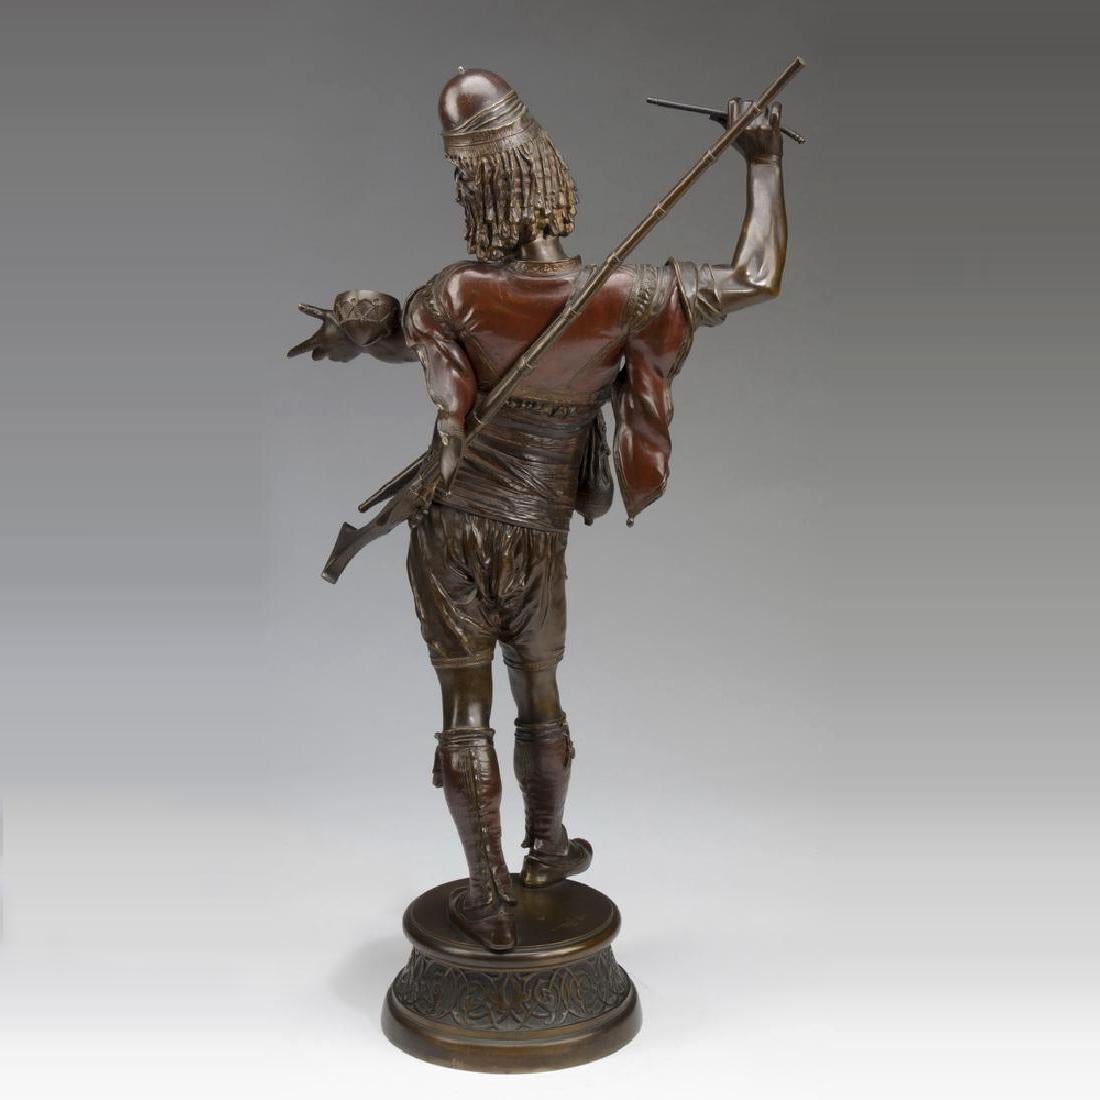 A stunning patinated bronze sculpture of an ottoman warrior by Emile Guillemin.
Entitled ‘Bashi Basouk,’ depicting an Ottoman warrior with his right hand raised, holding a stick which appears to be playing with two little drums on his left arm. With